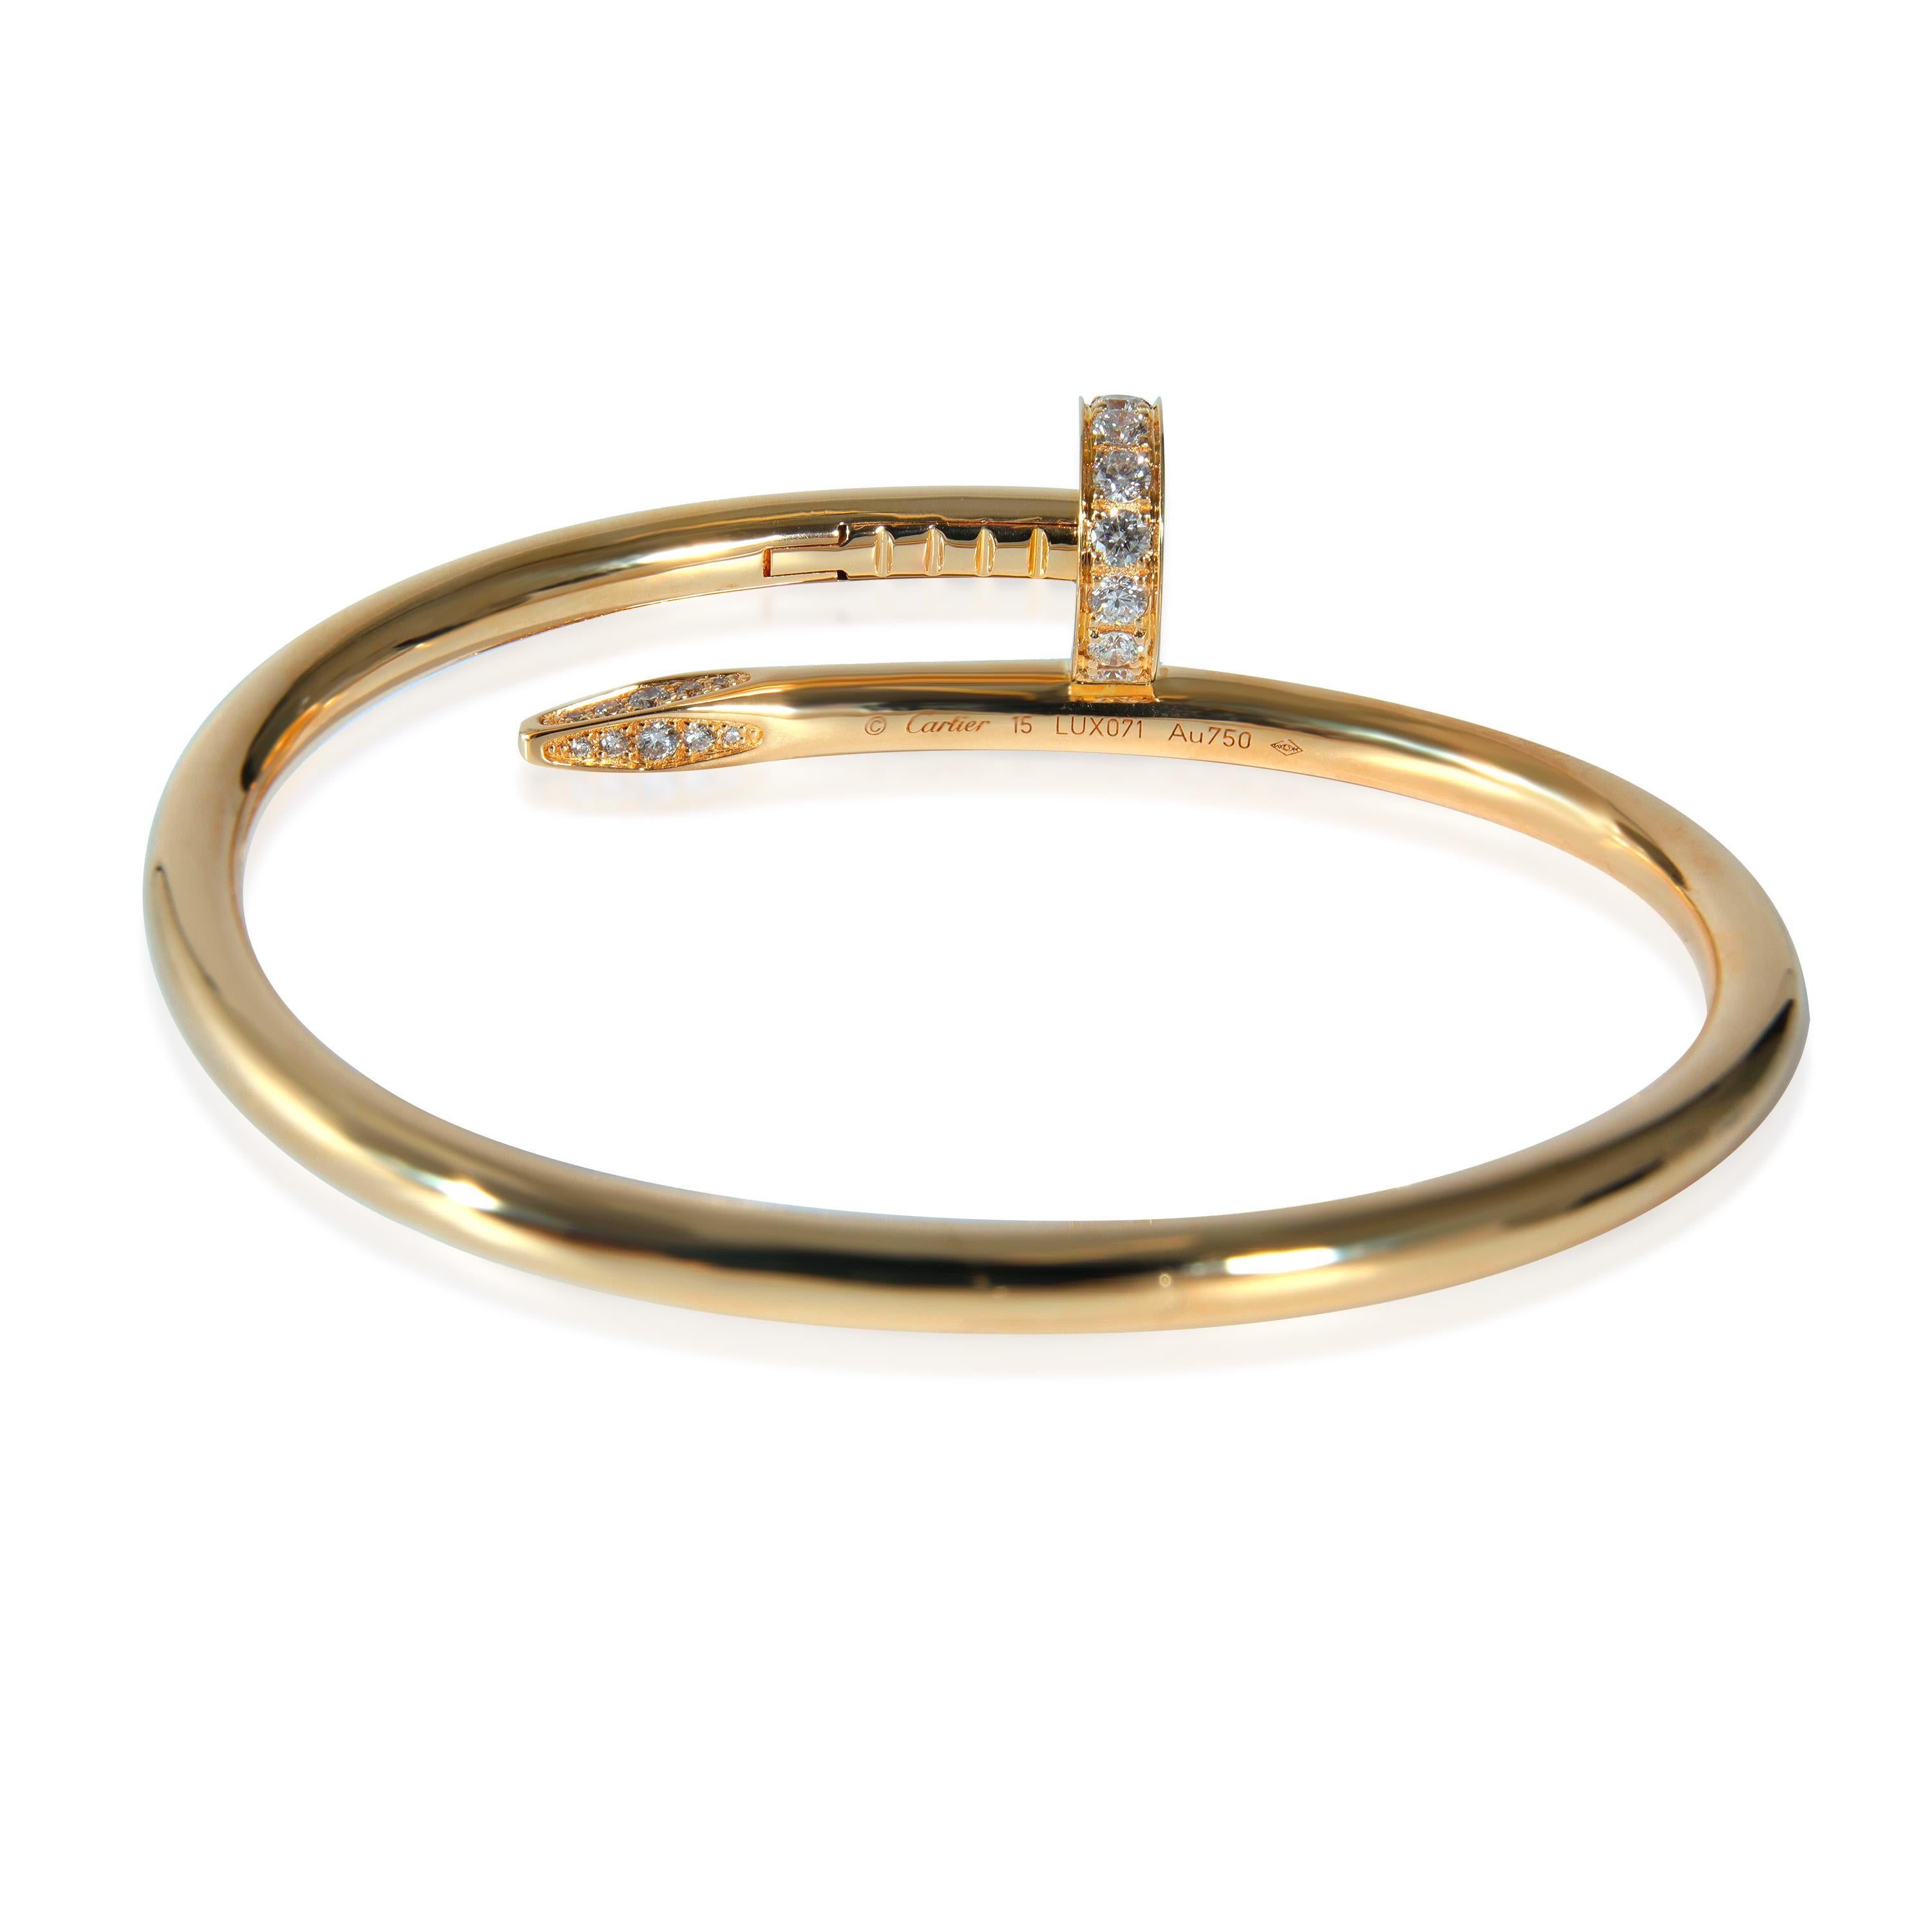 Cartier Juste Un Clou Bracelet in 18k Yellow Gold 0.58 CTW In Excellent Condition For Sale In New York, NY